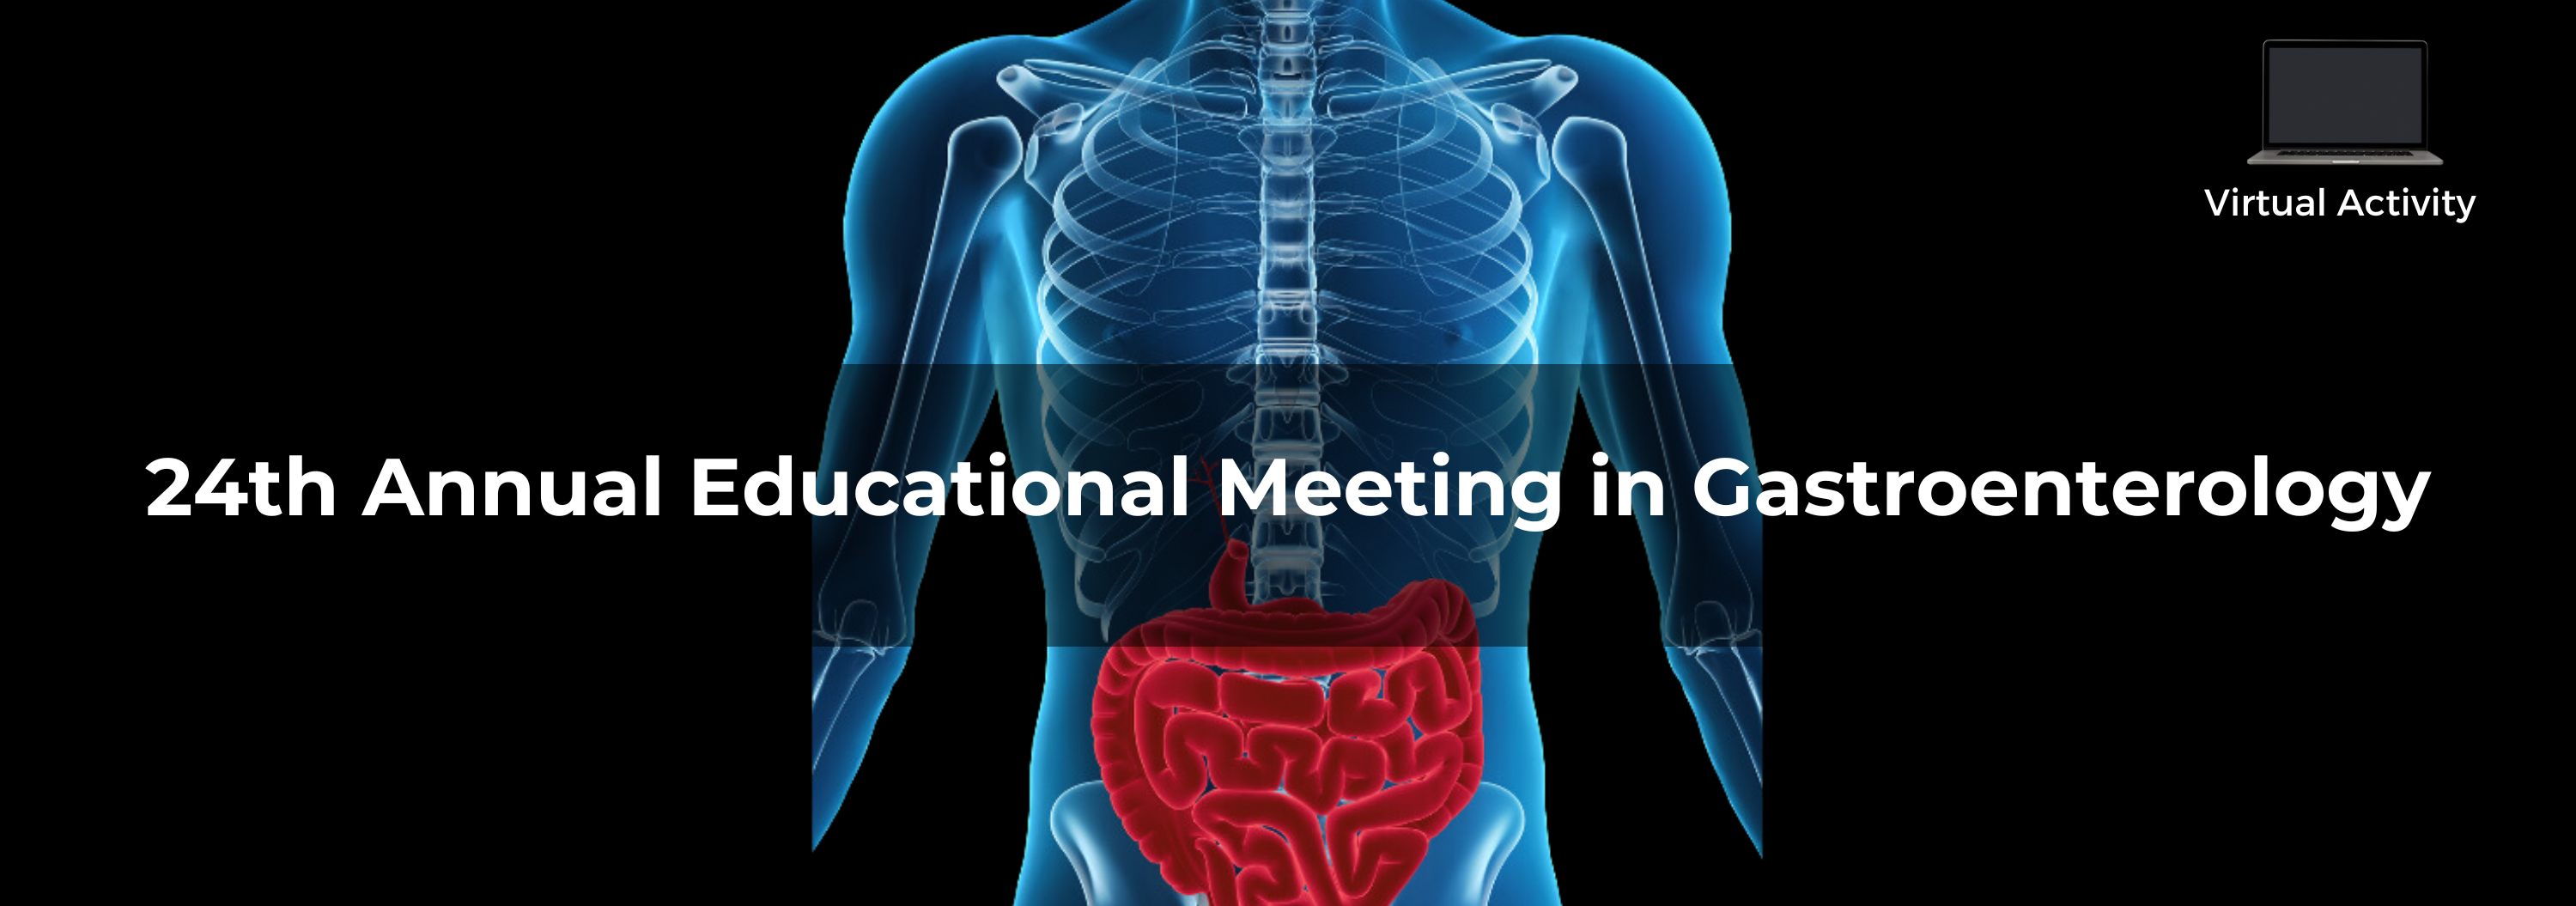 24th Annual Educational Meeting in Gastroenterology Banner